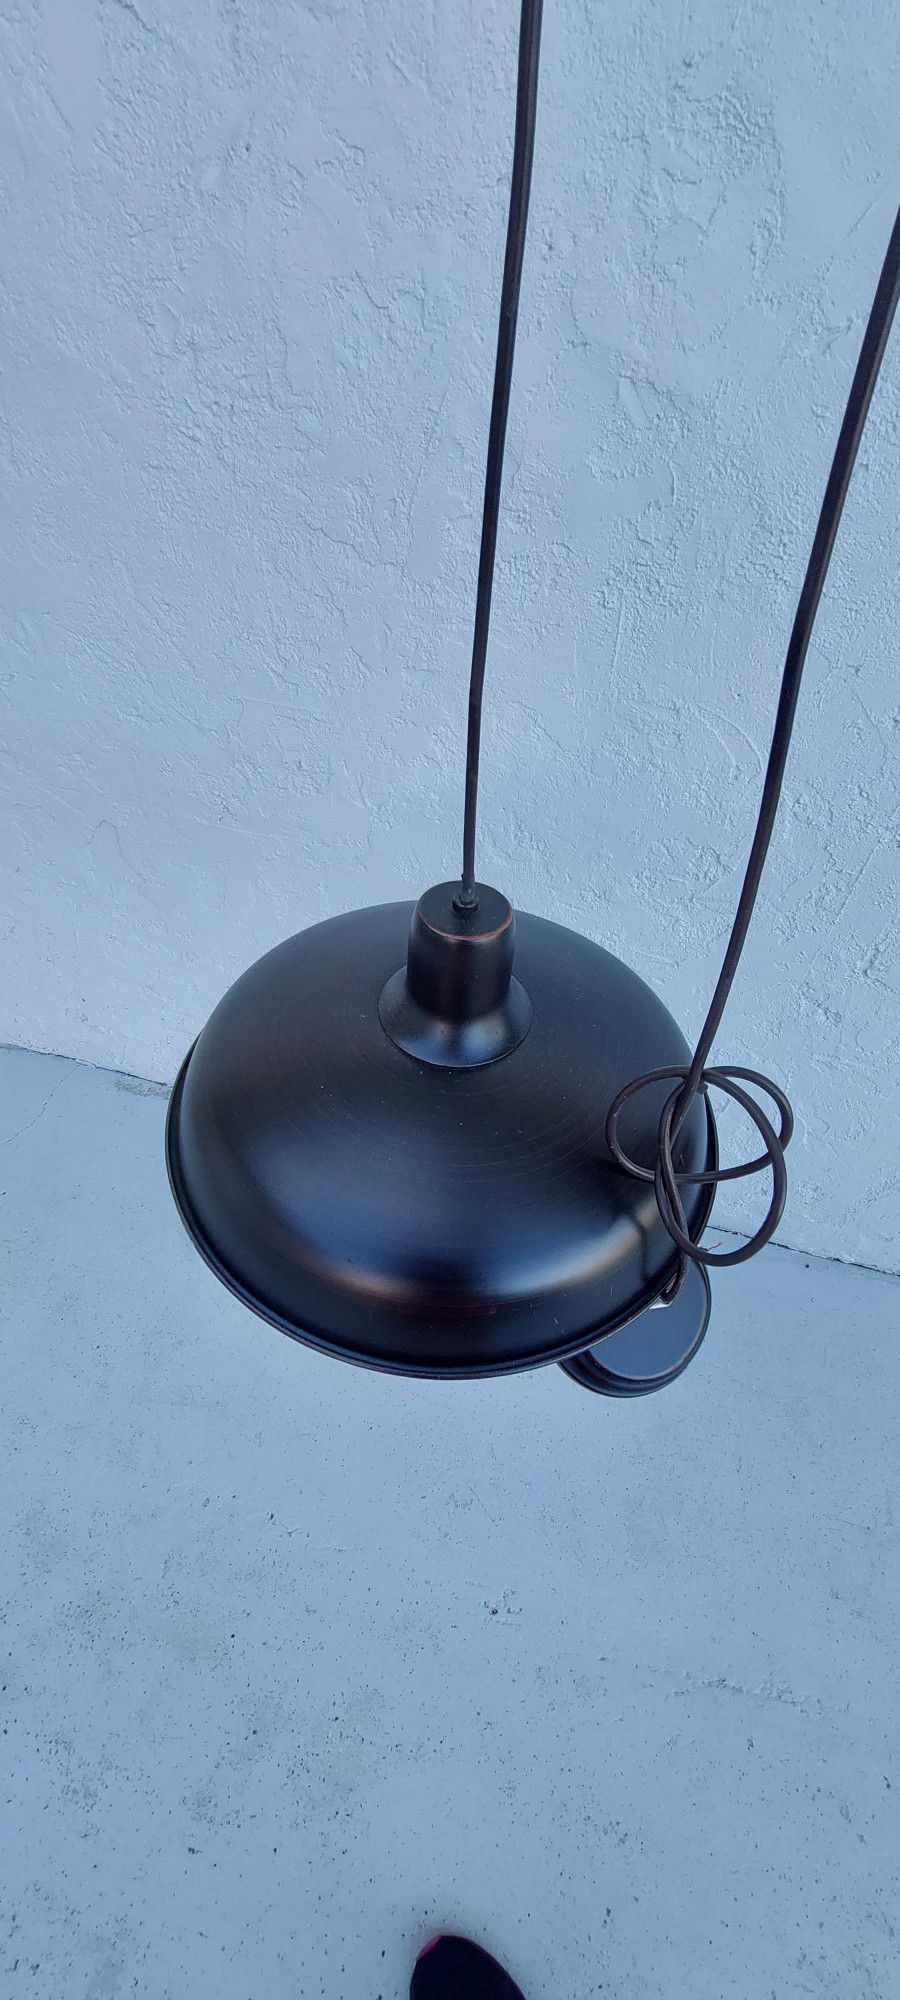 Hanging Lamp Set For Kitchen, Bar, Patio, Dining Rom $40 BOTH NEW 